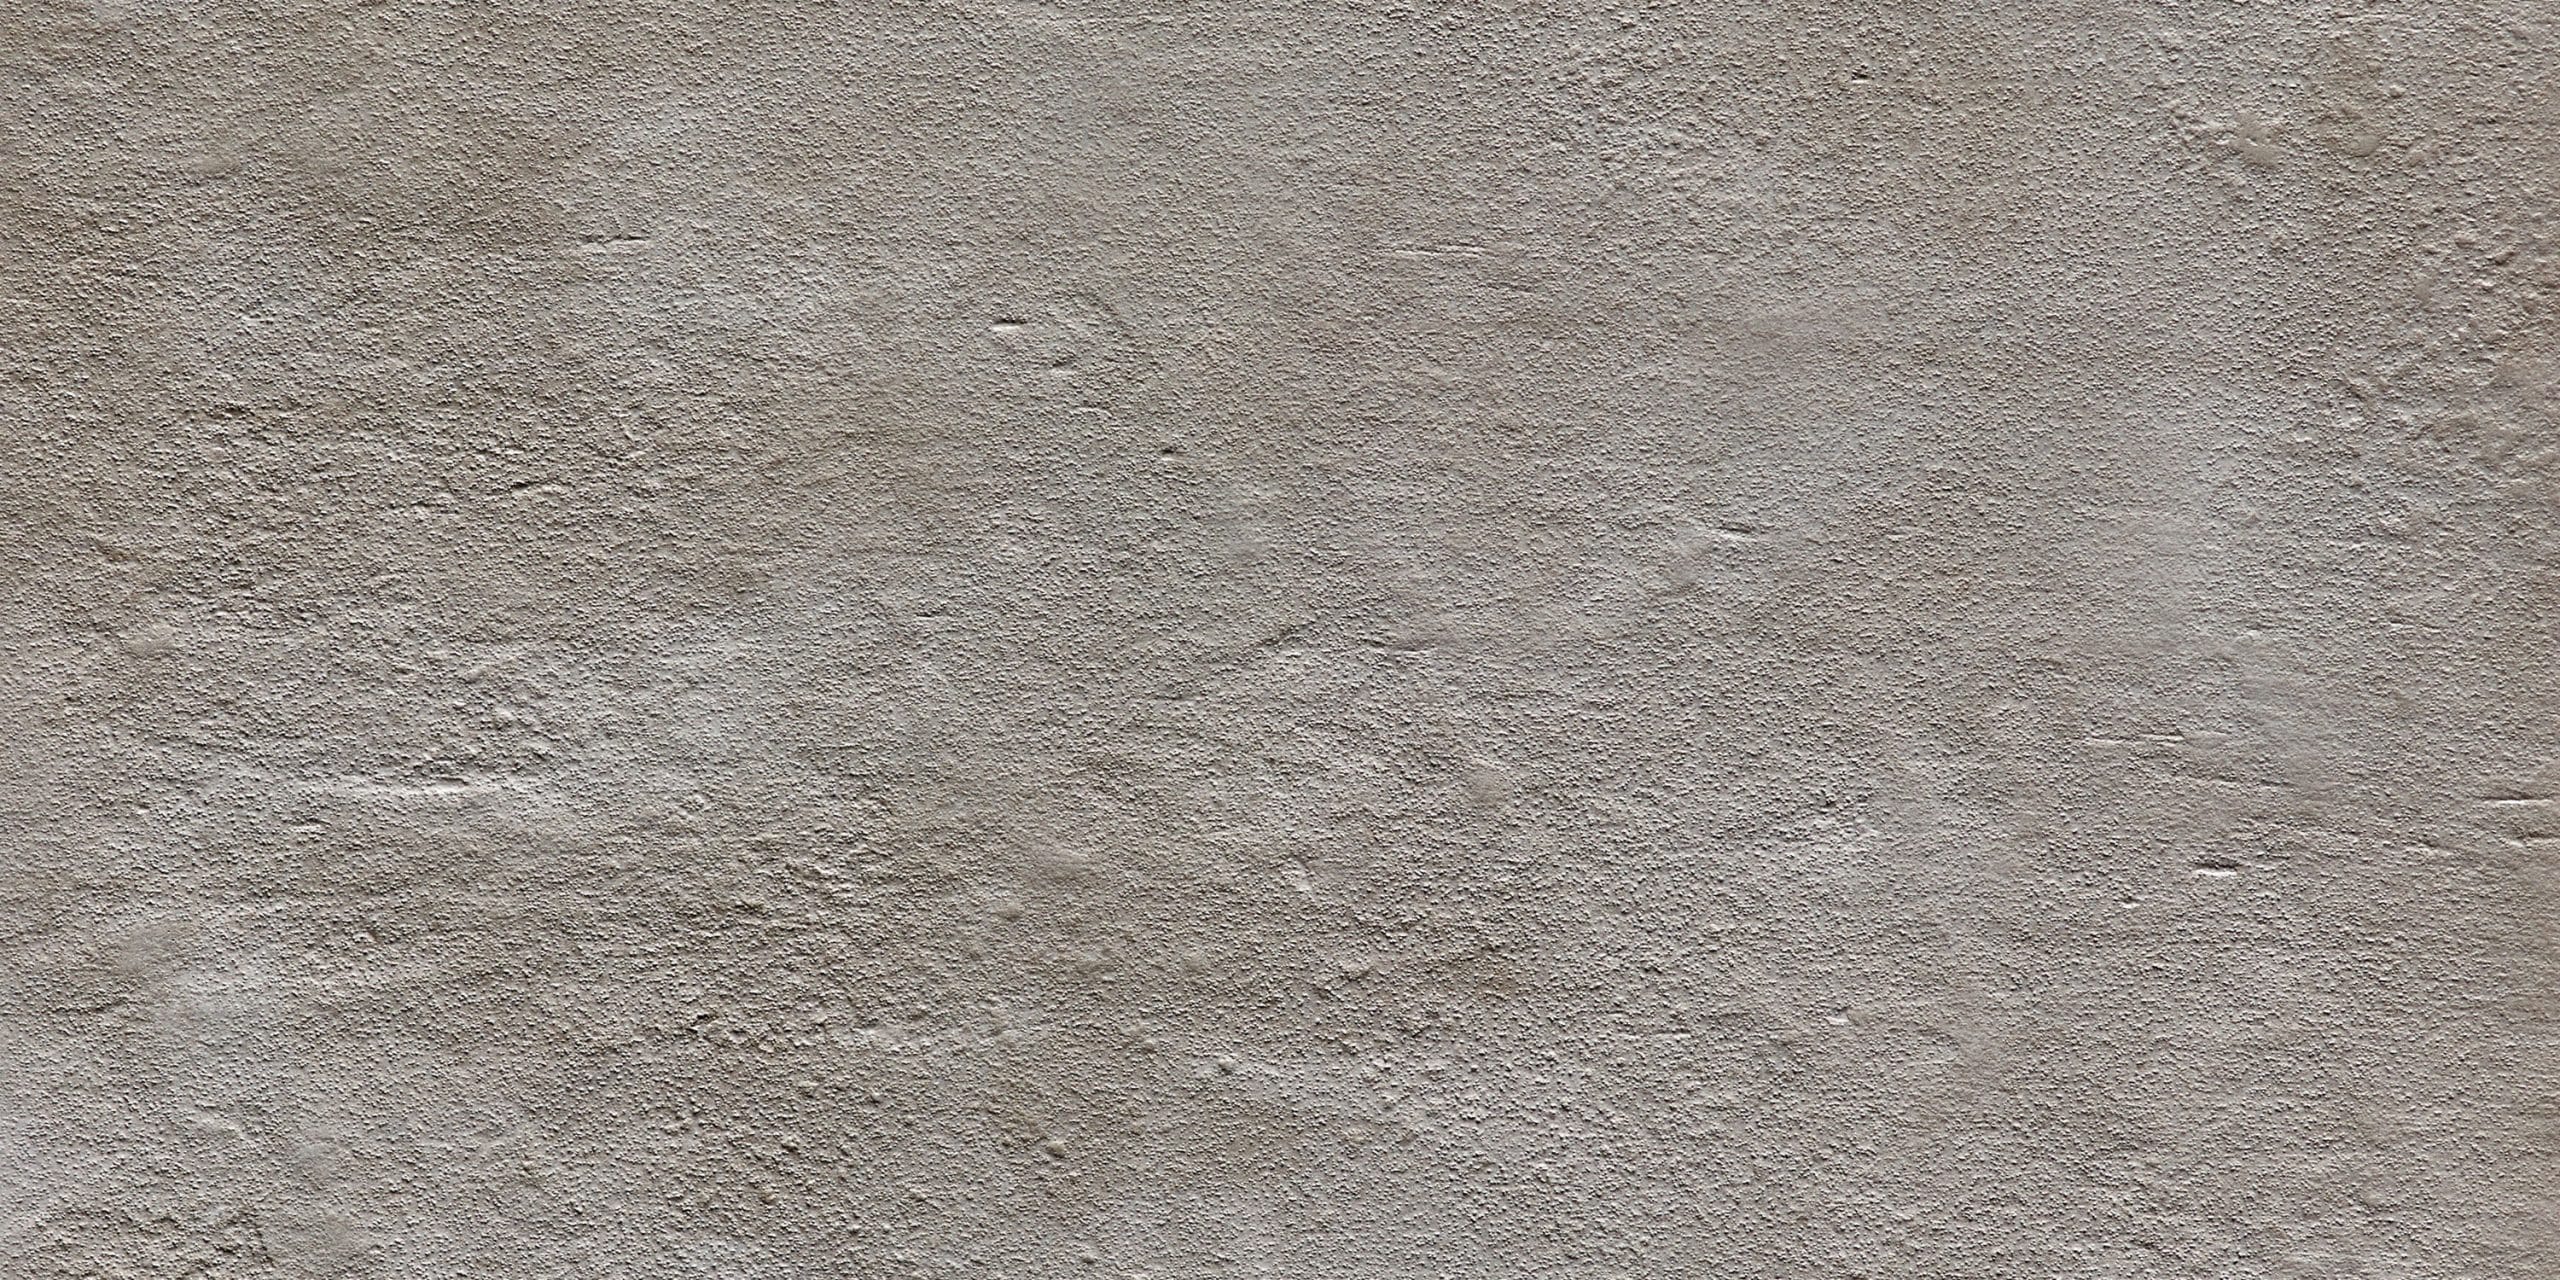 A close-up view of a grey textured ceramic tile with intricate patterns.